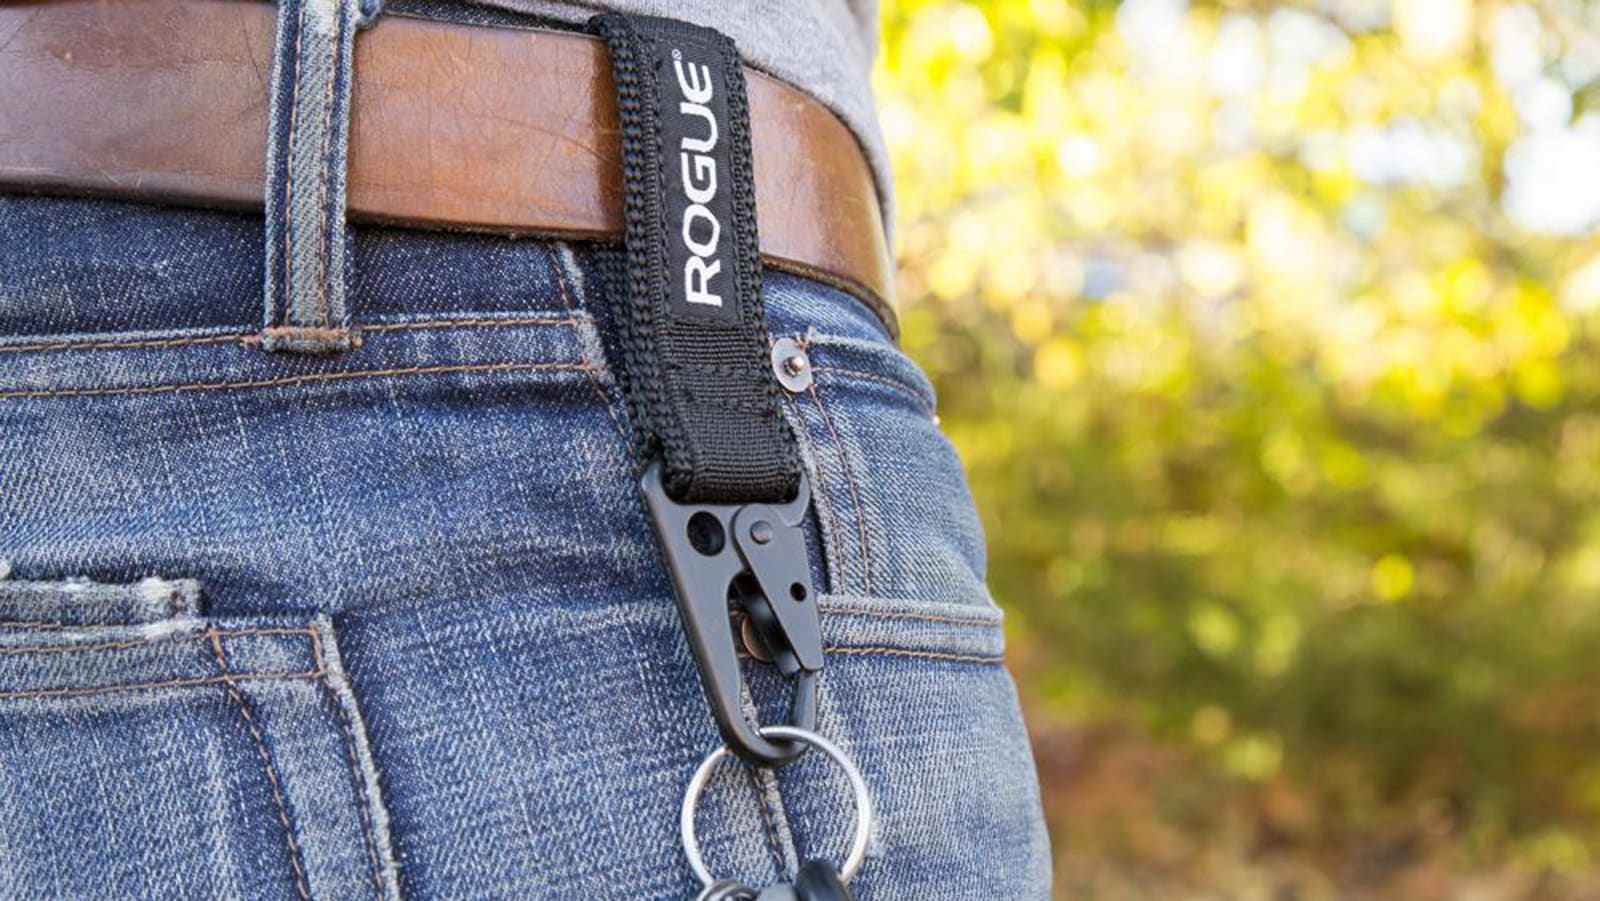 Rogue Industries Leather Key Chain